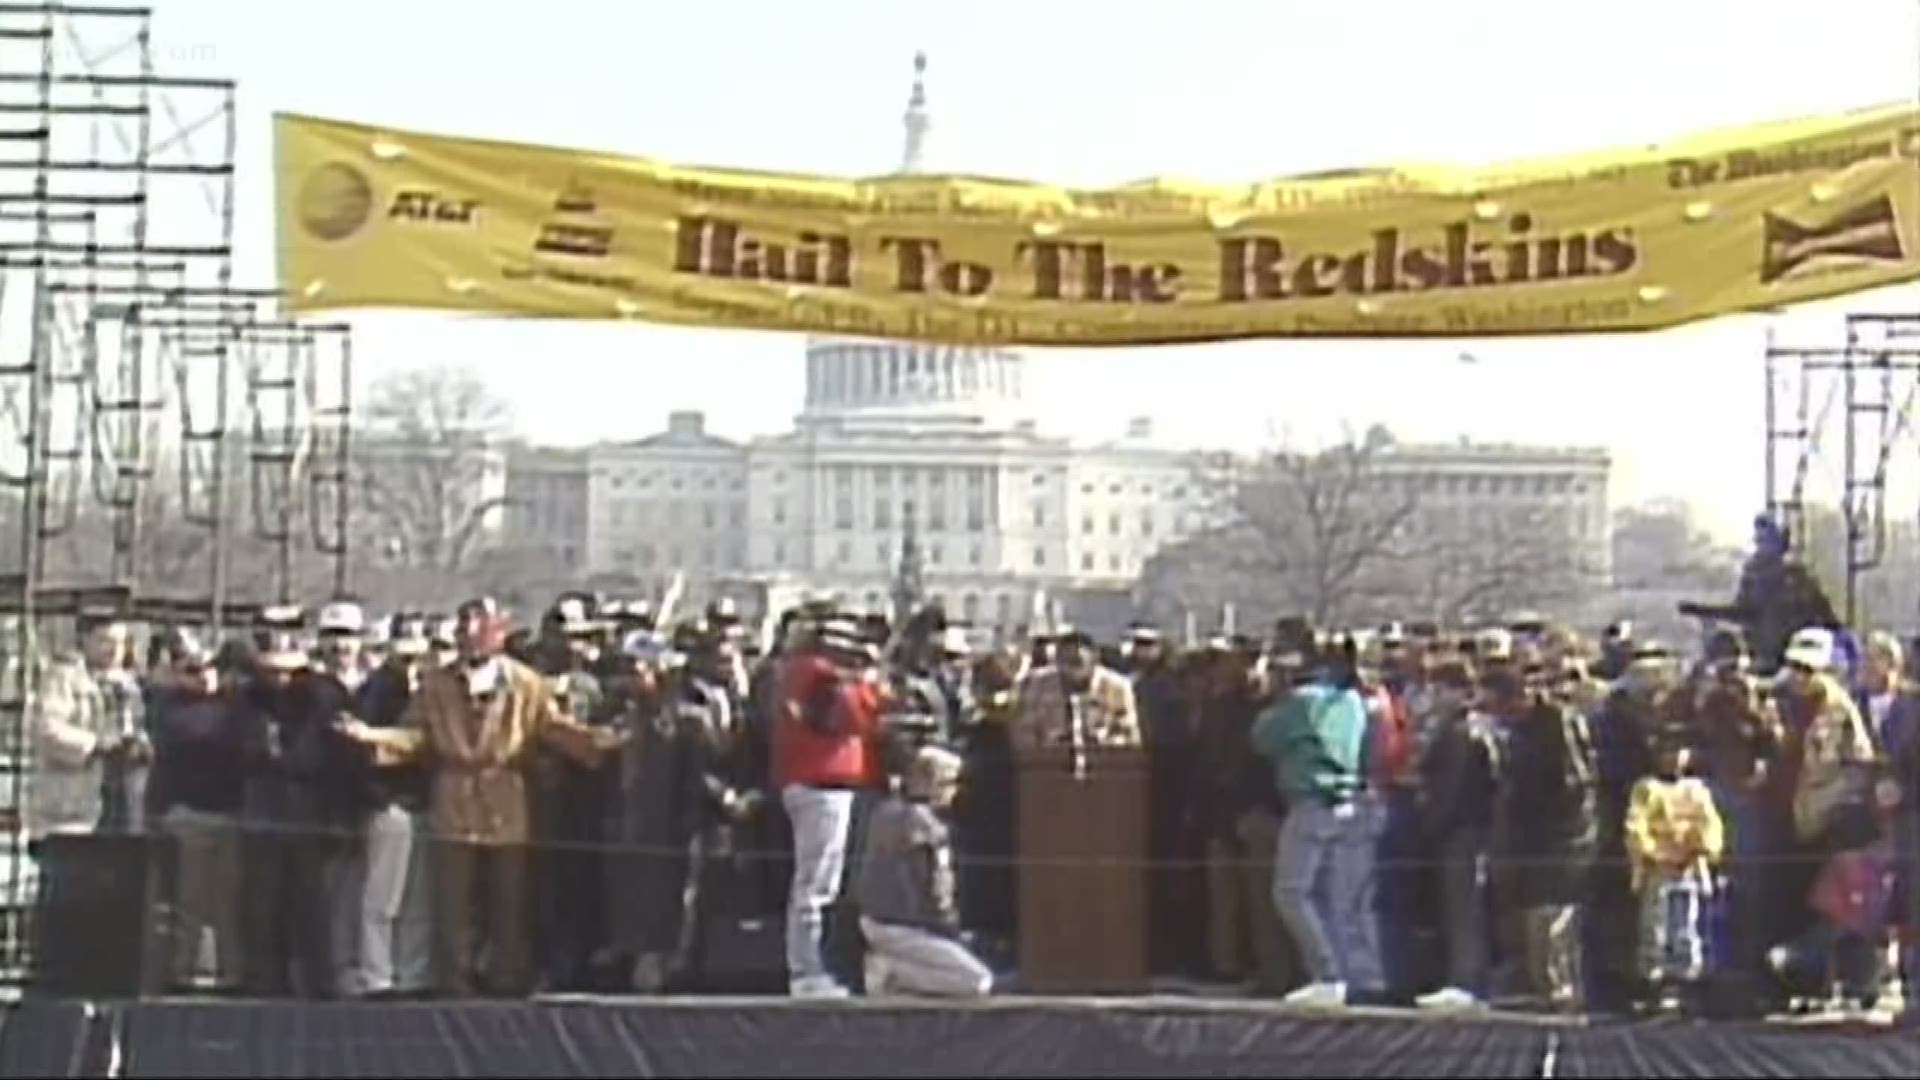 DC's hosted its first major parade honoring a sport team in 1988 when the Redskins won the Superbowl.